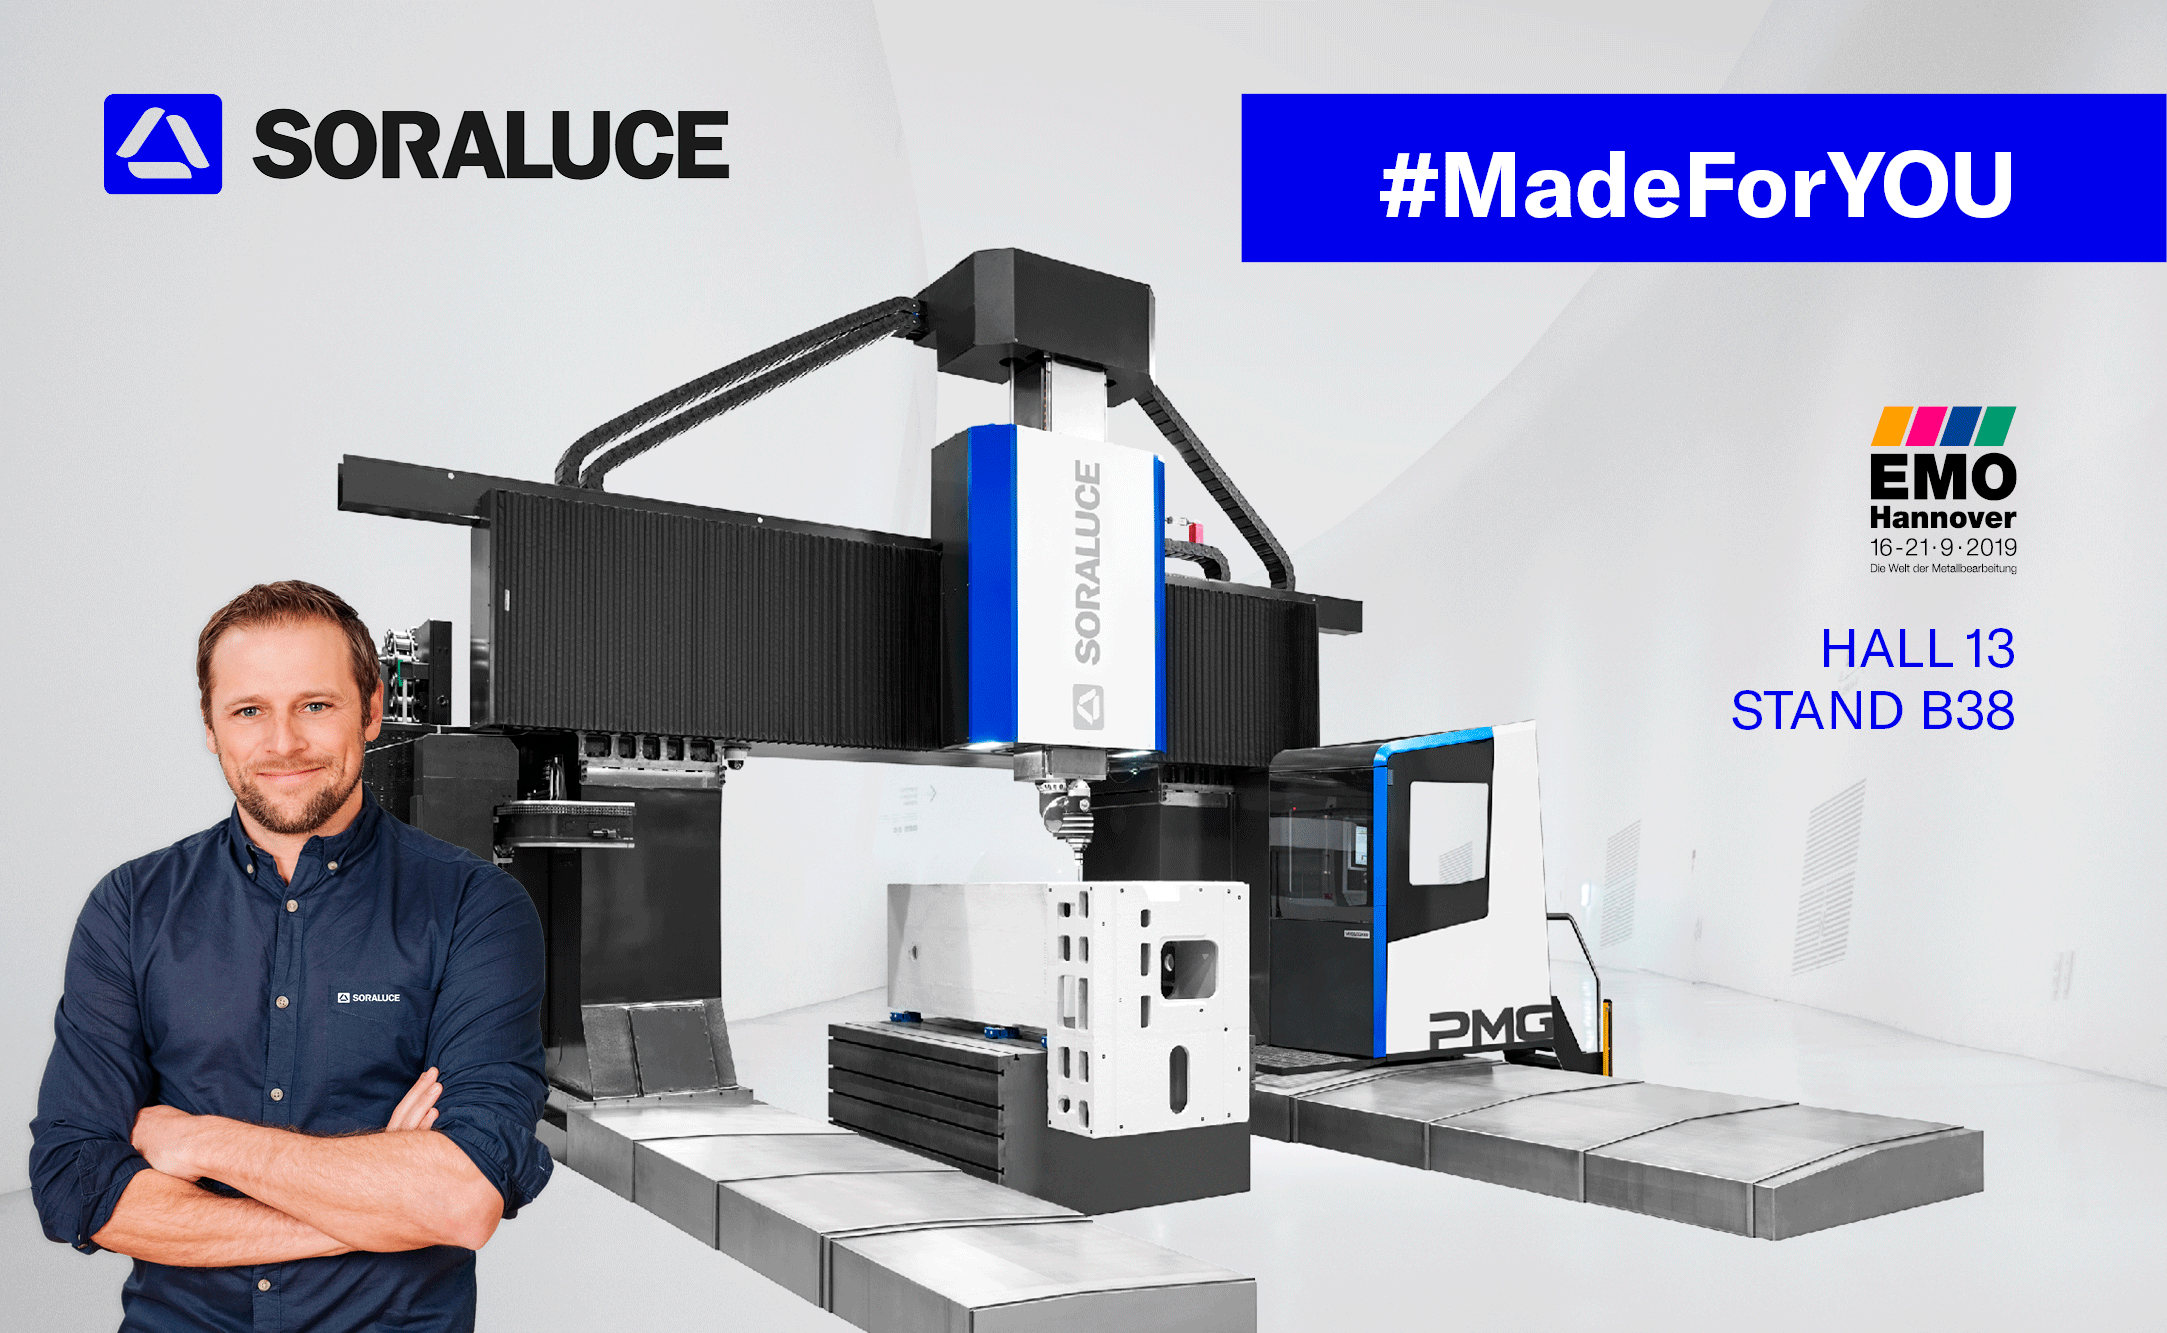 #MadeForYOU - Soraluce creates value in the day to day business of its customers